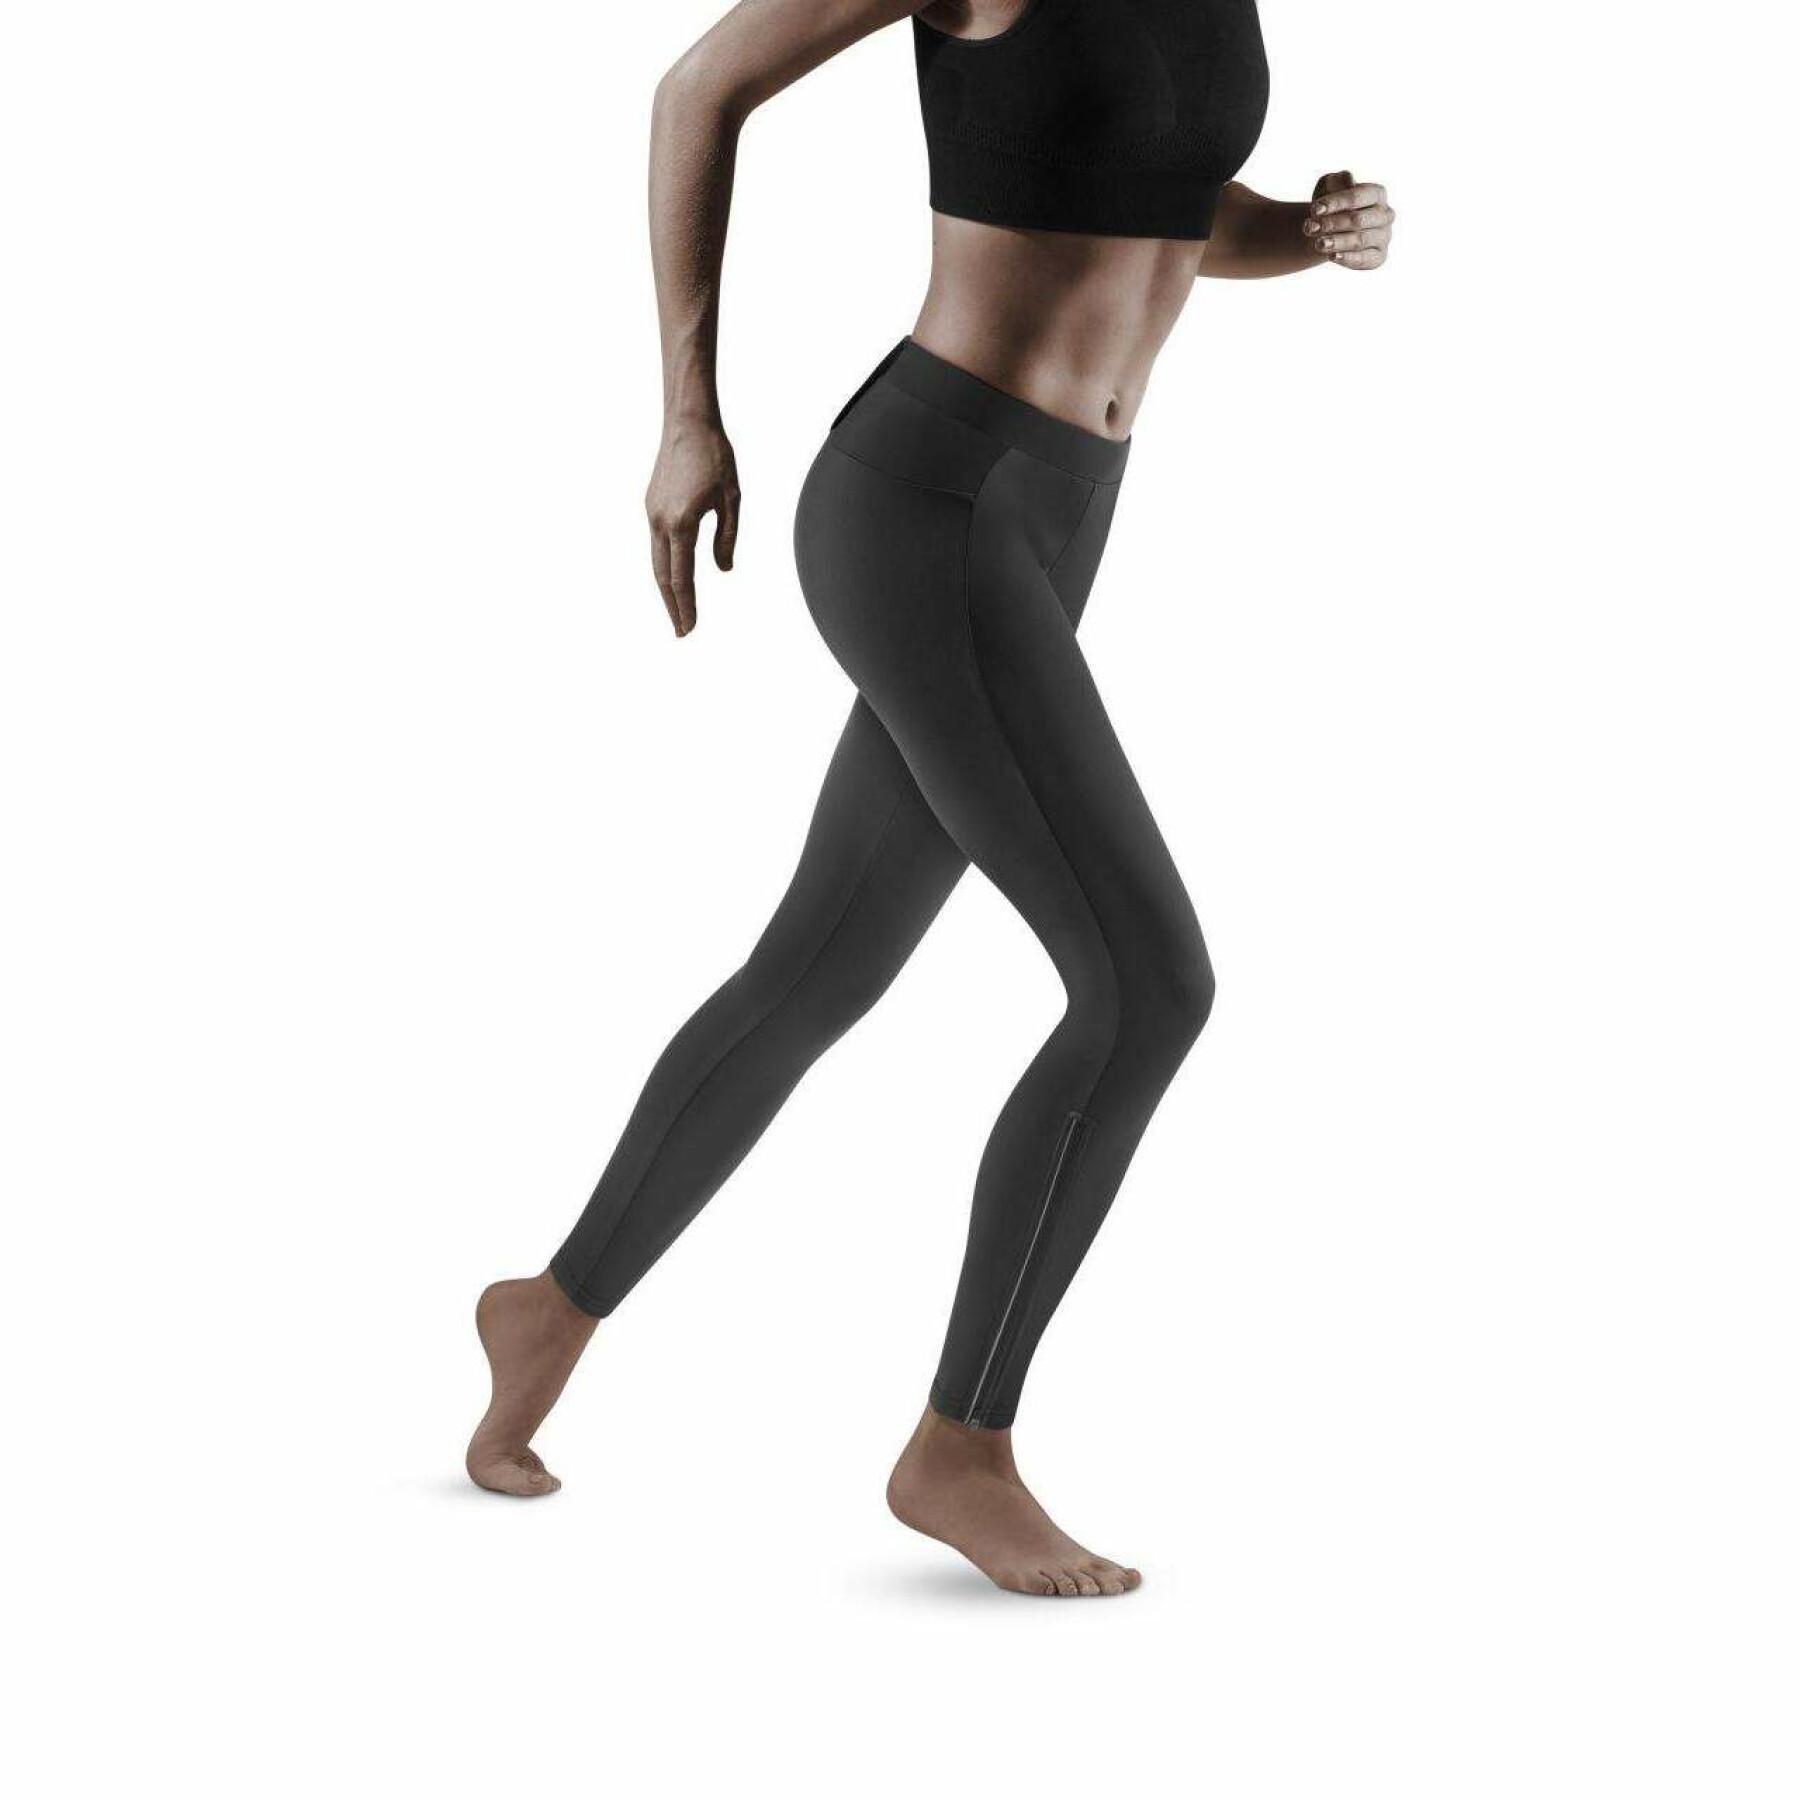 Women's wear - On Running M Track Pants - Slocog wear - Baselayers - Legging  woman CEP Compression Camocloud